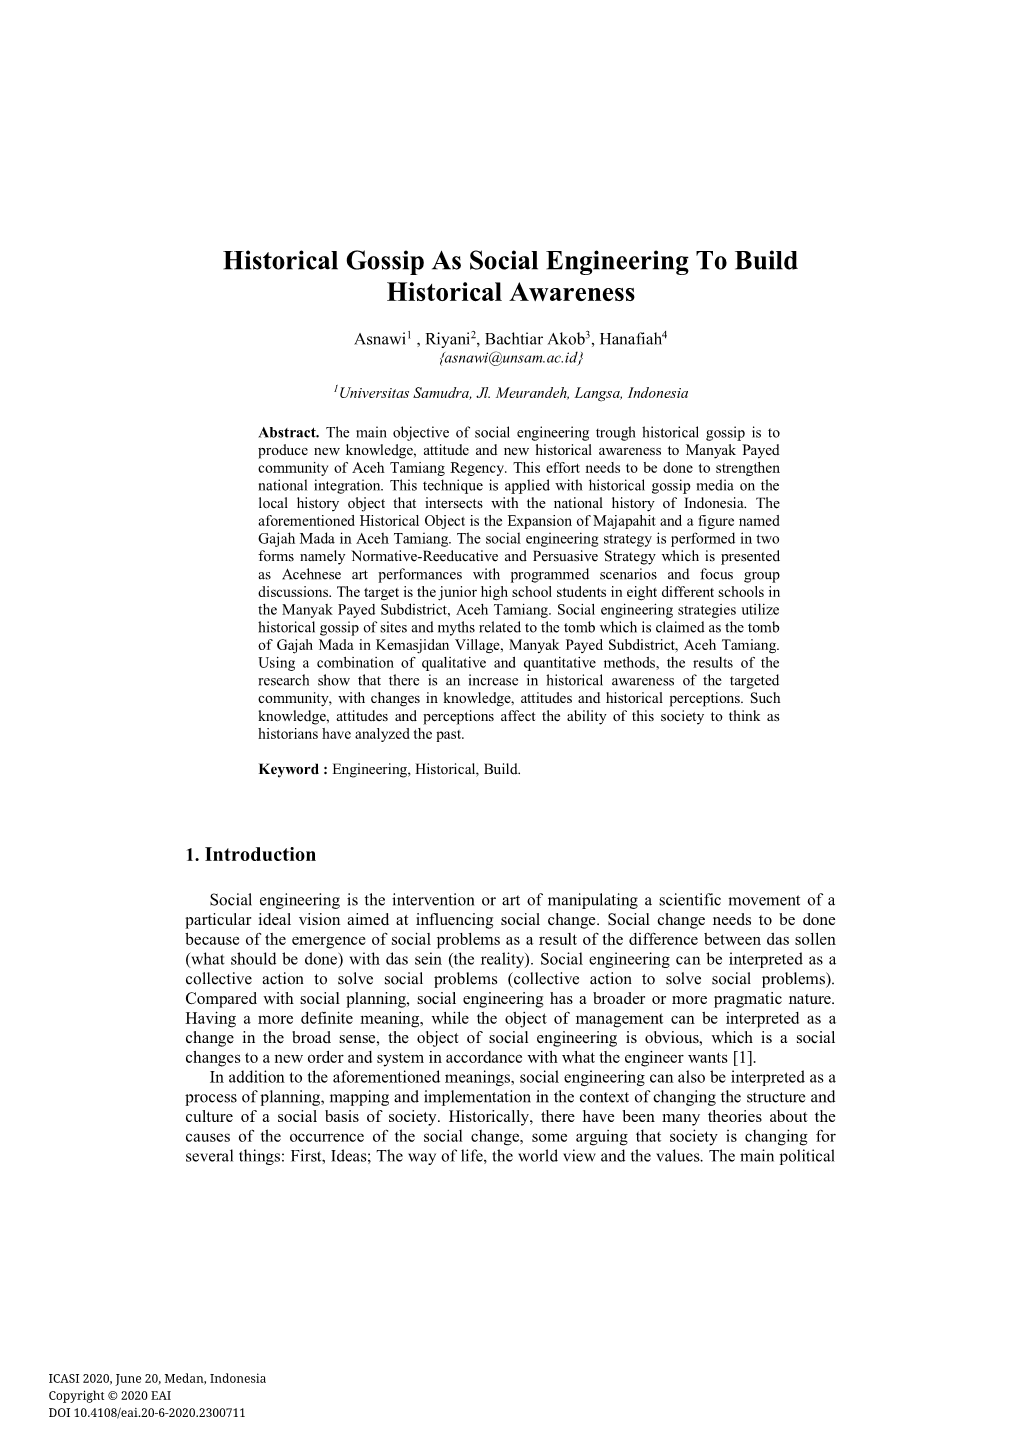 Historical Gossip As Social Engineering to Build Historical Awareness